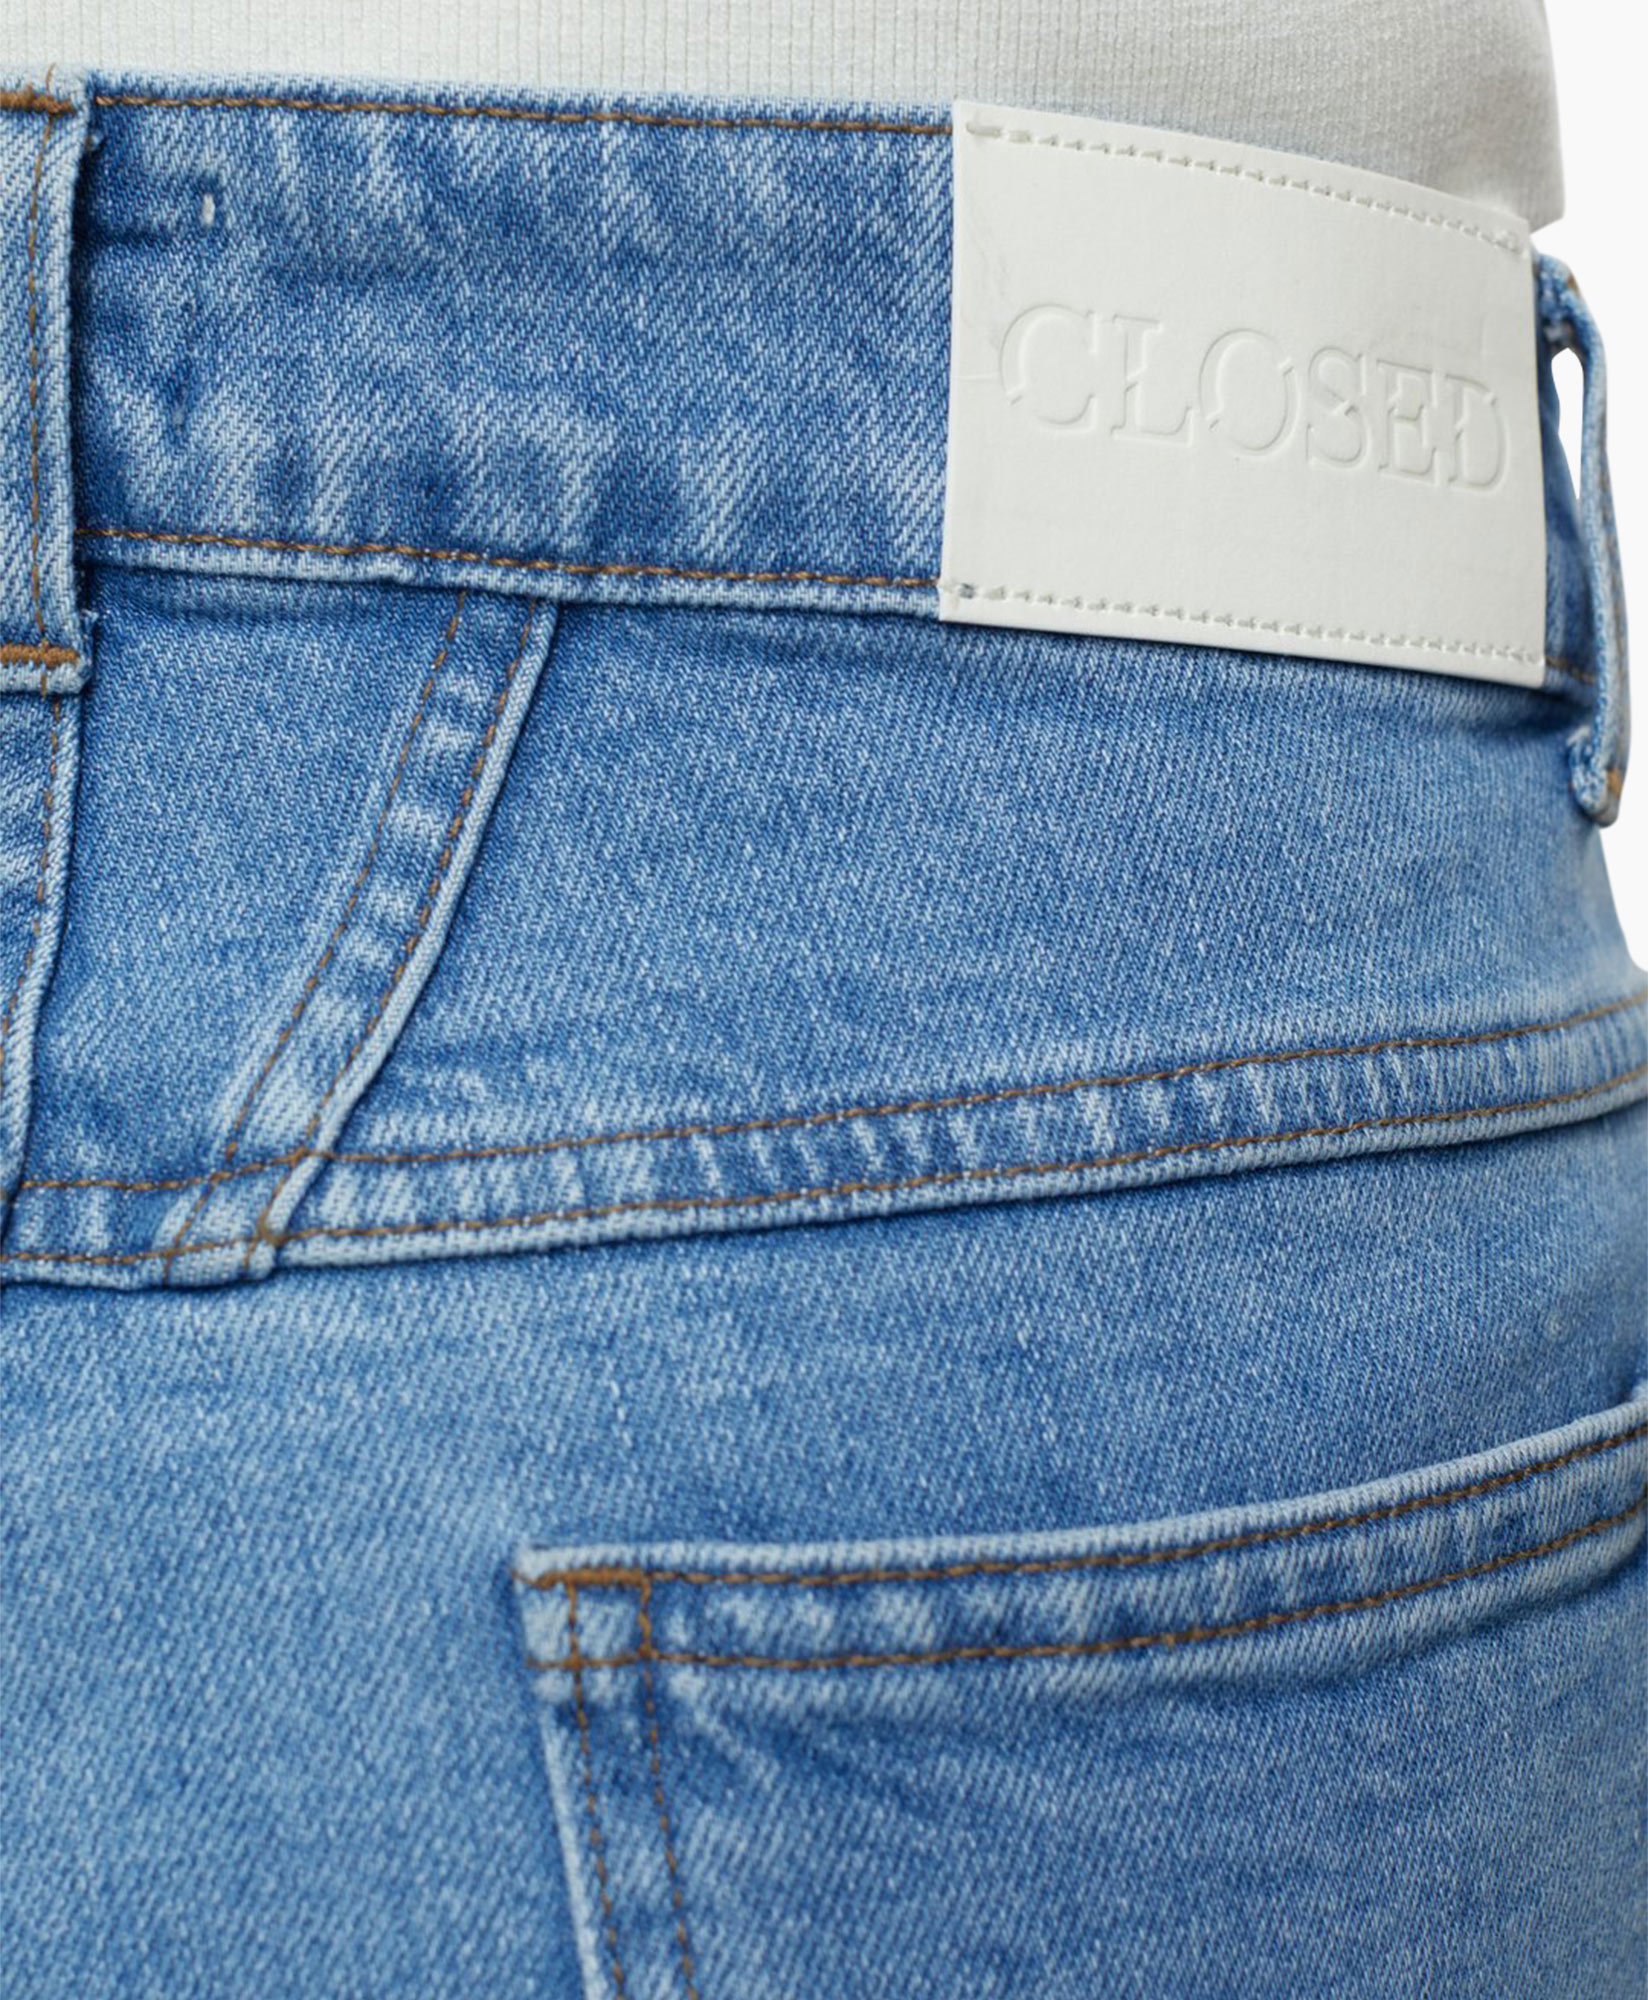 Jeans Pedal Pusher midden blauw